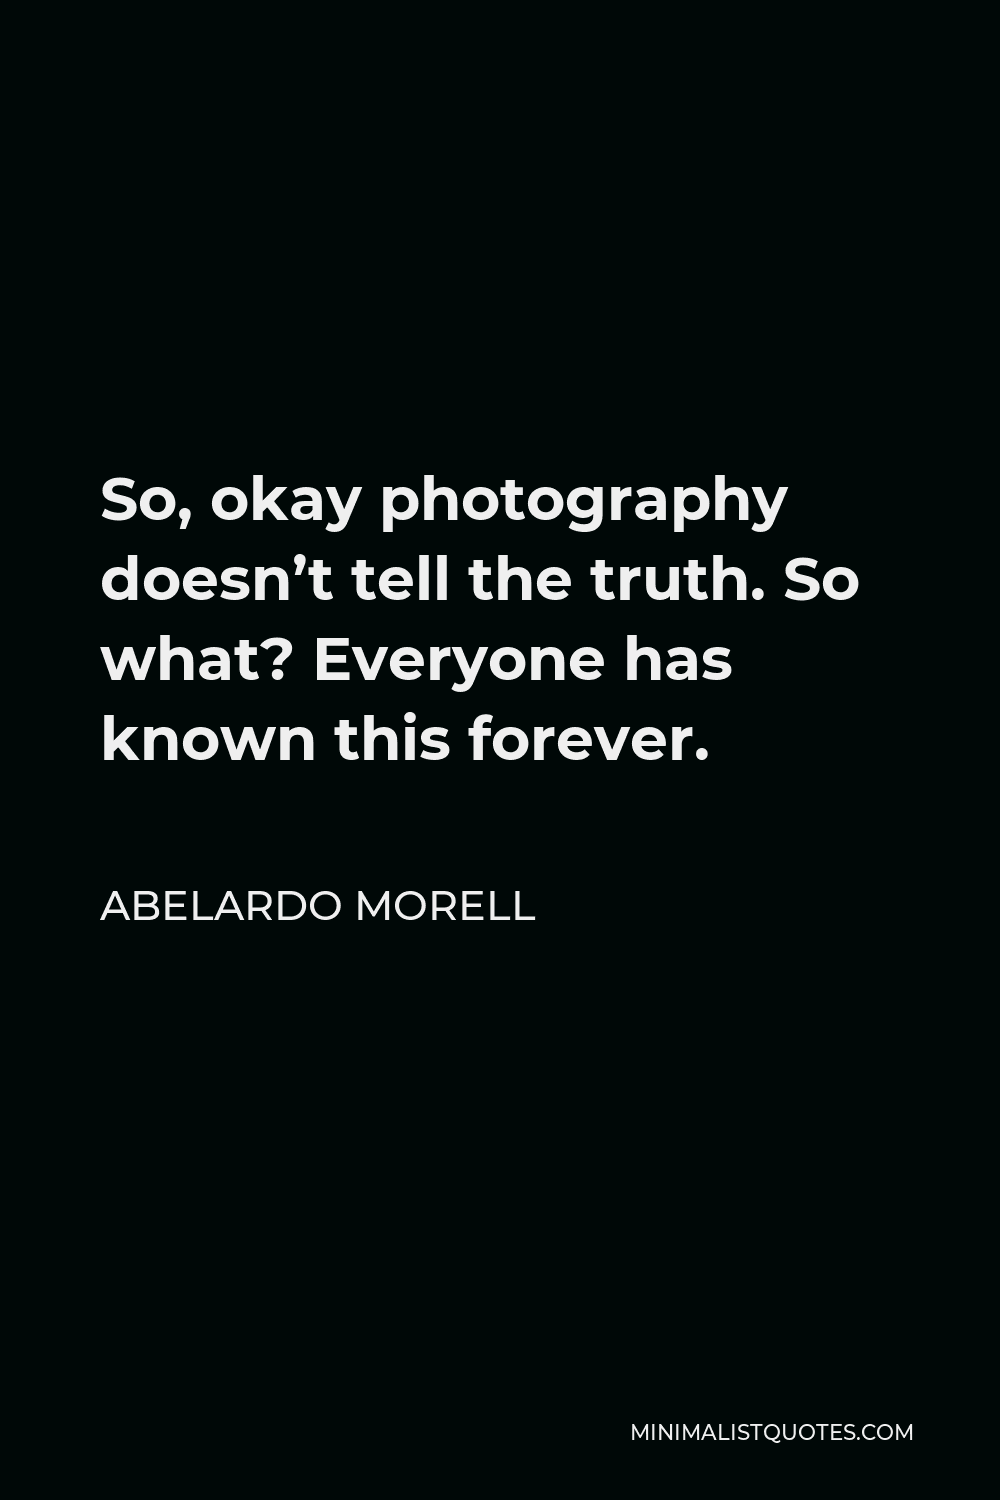 Abelardo Morell Quote - So, okay photography doesn’t tell the truth. So what? Everyone has known this forever.